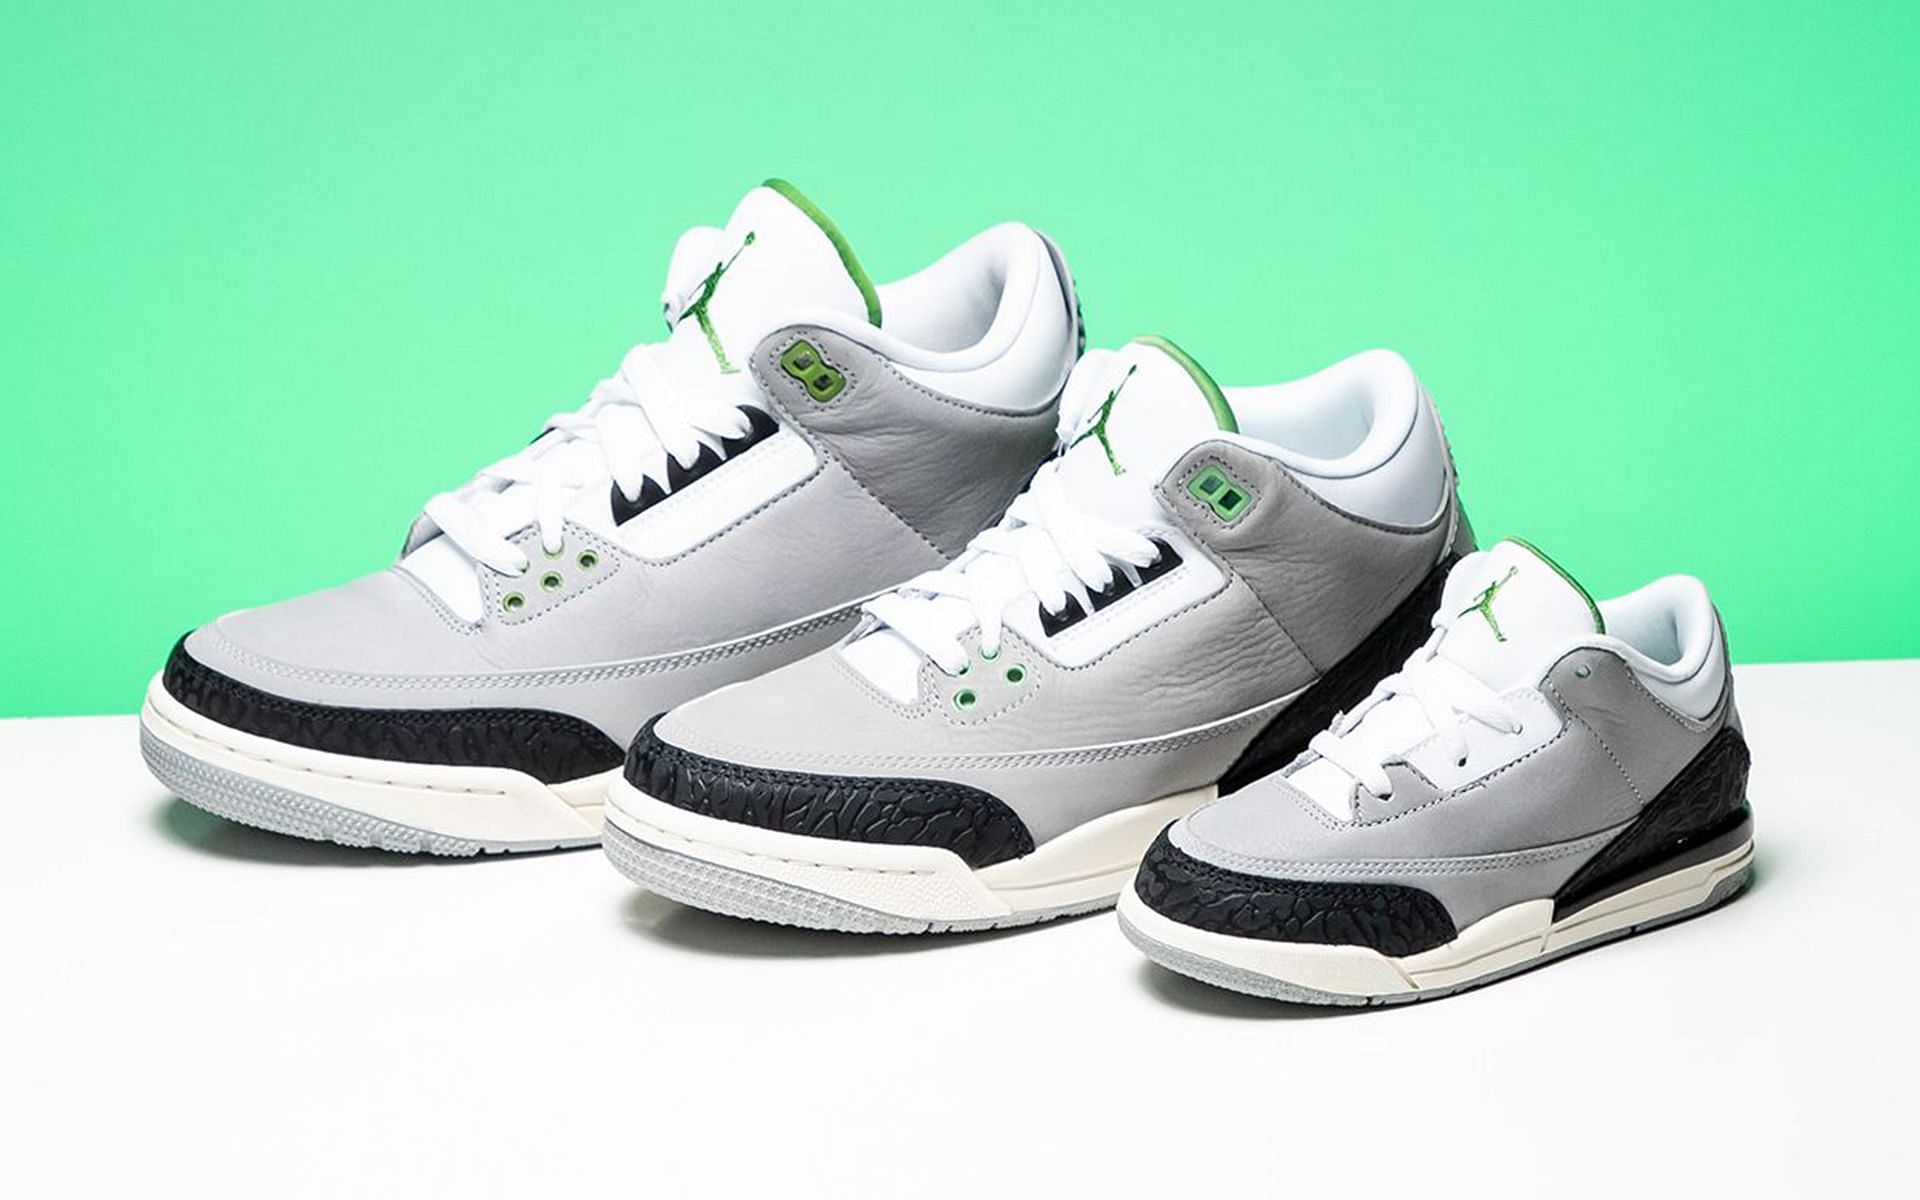 Take a look at the Chlorophyll colorway (Image via Stadium Goods)